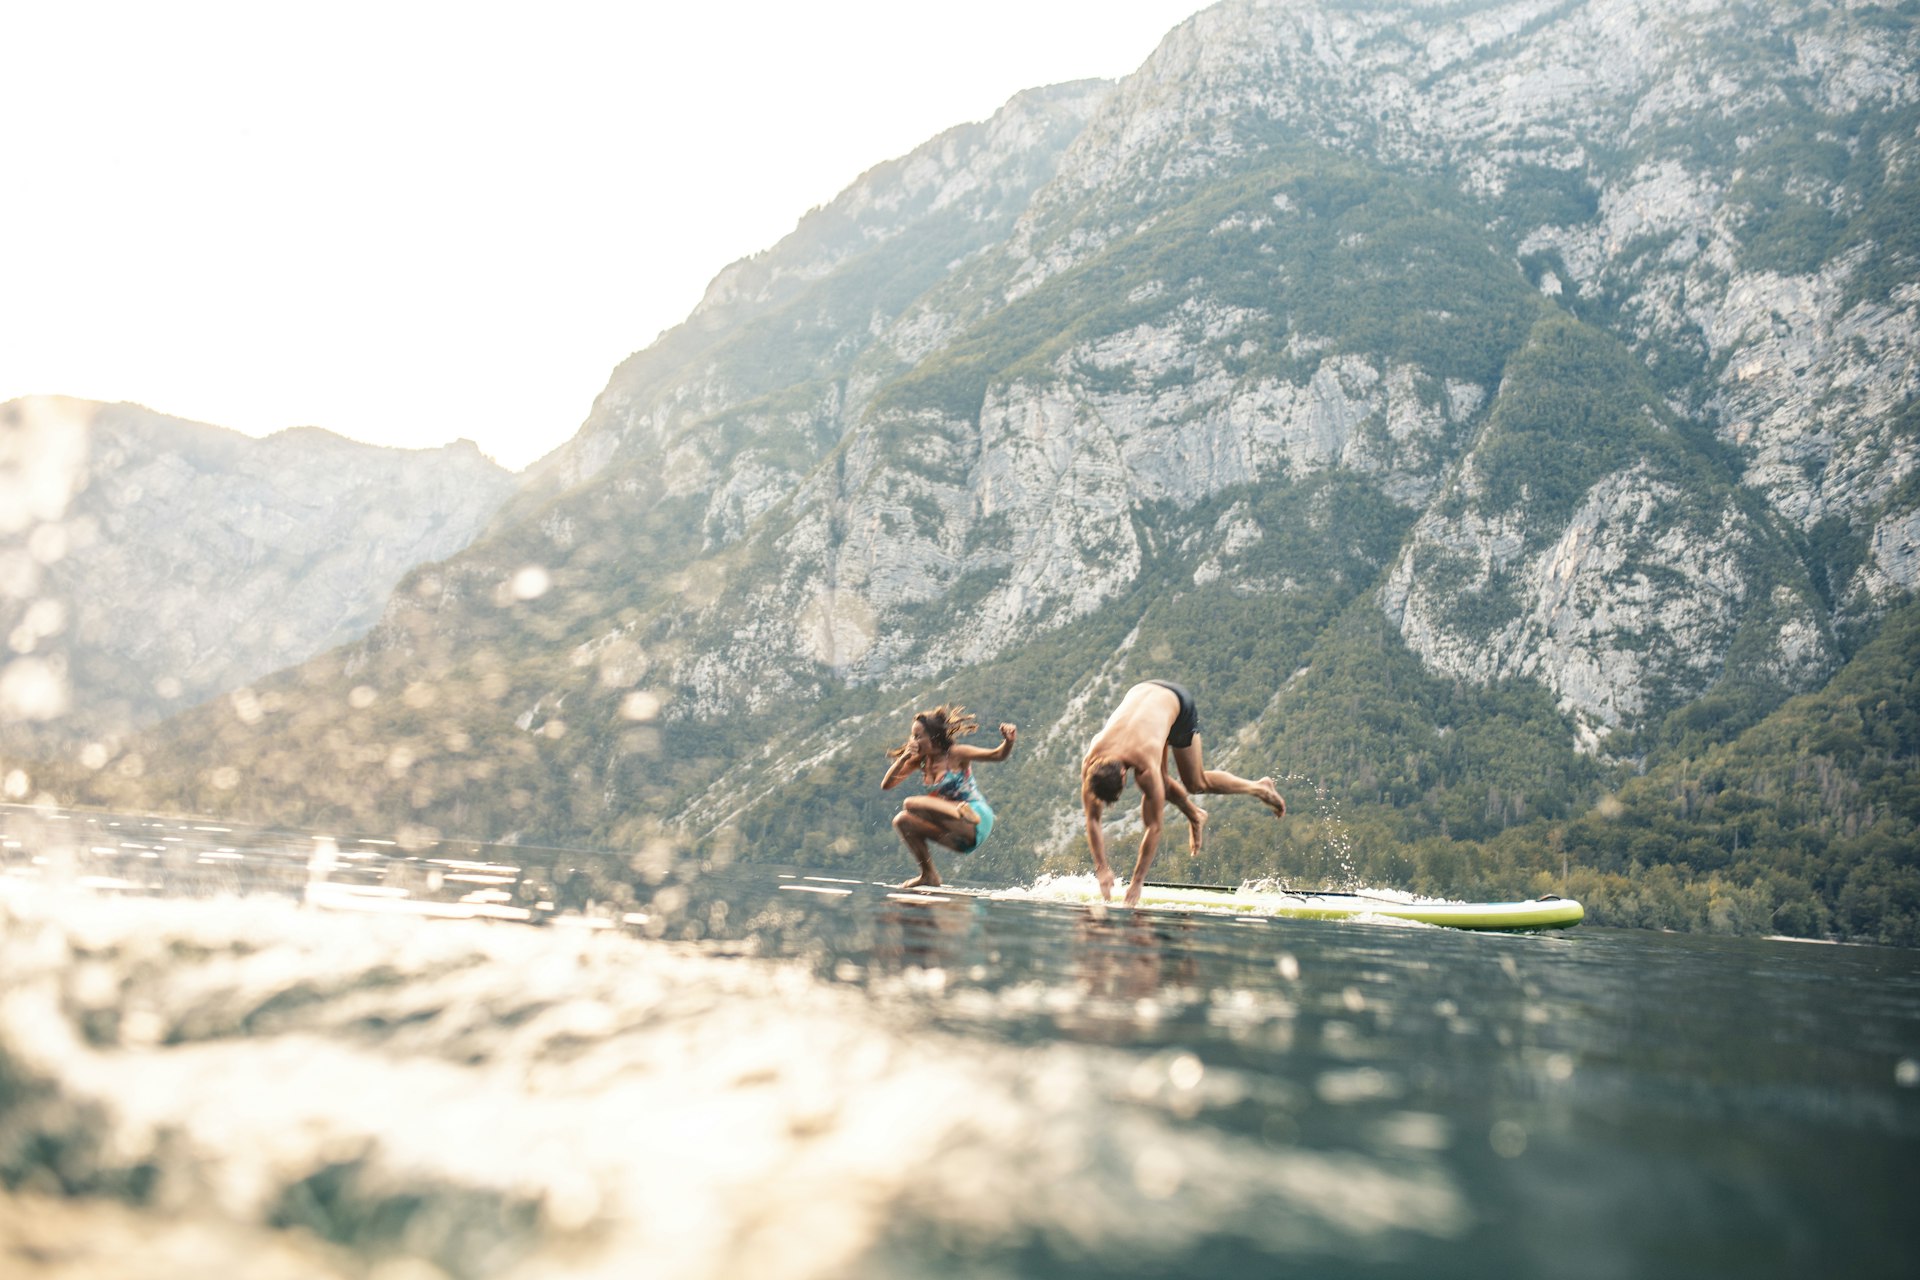 Two people jump off a paddleboard into a lake on a summer's day